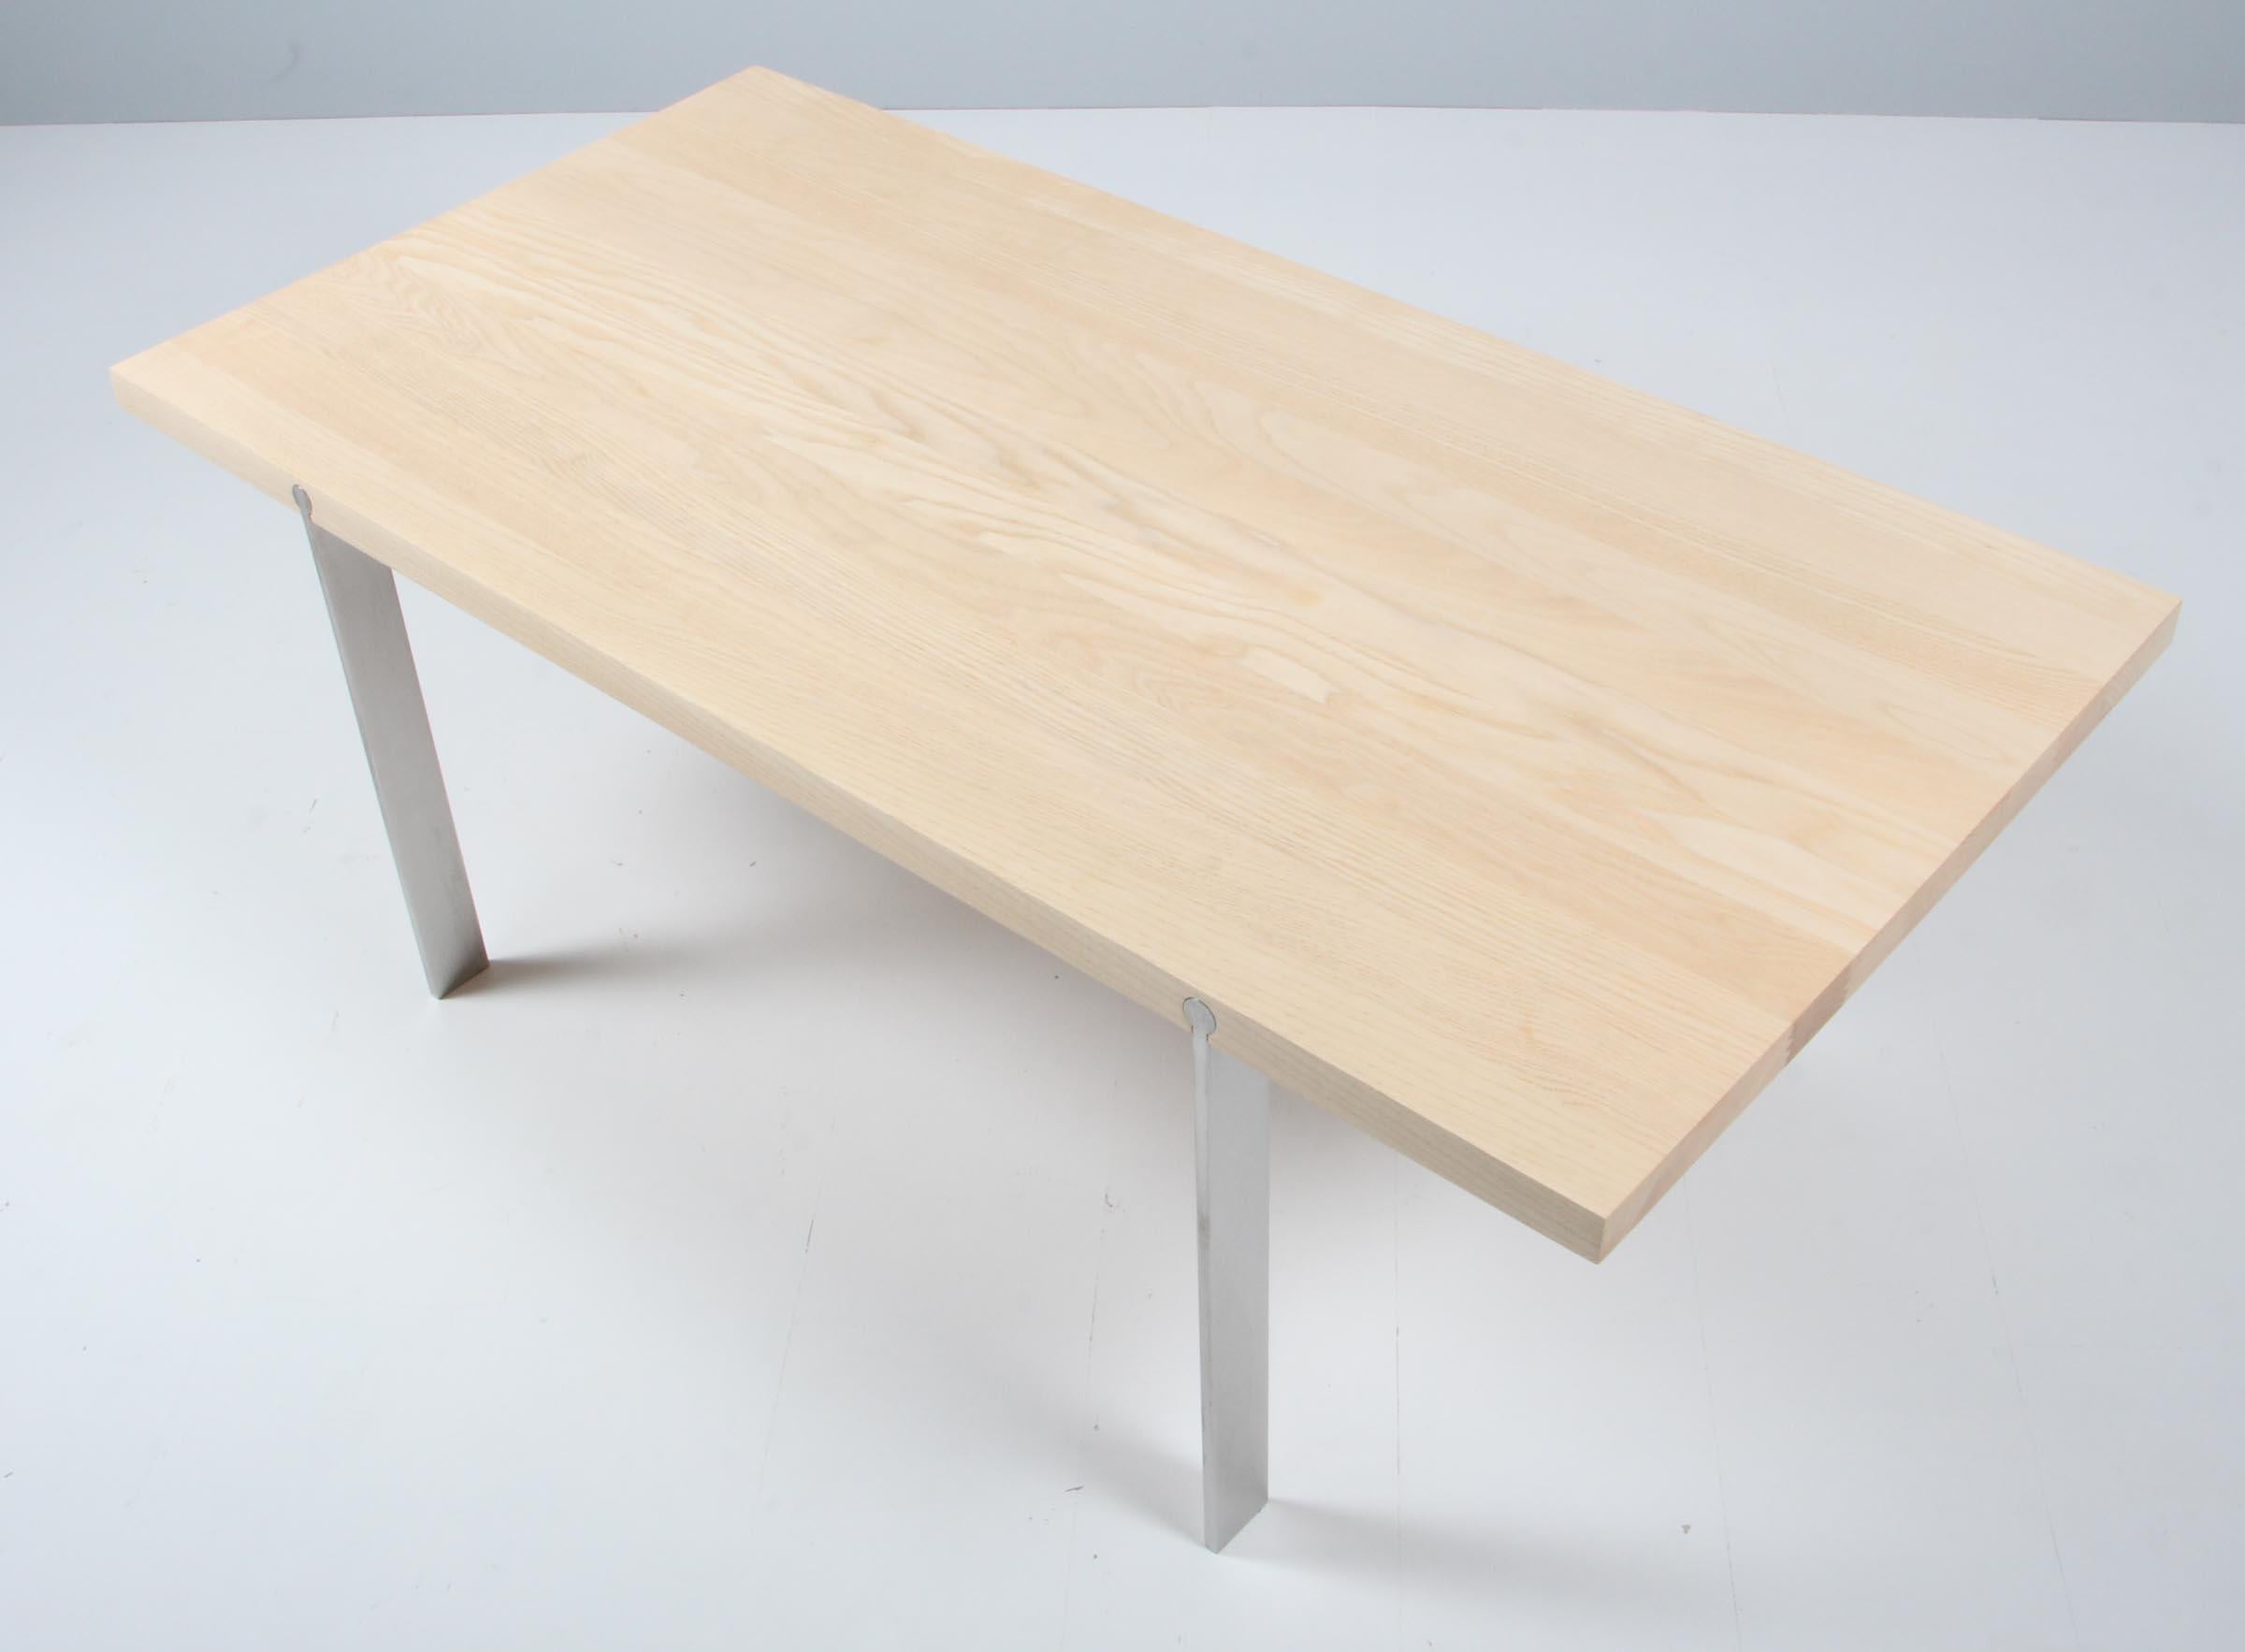 Aksel Kjersgaard coffee table in solid soap treated ash. Base of stainless steel.

Made by Naver.